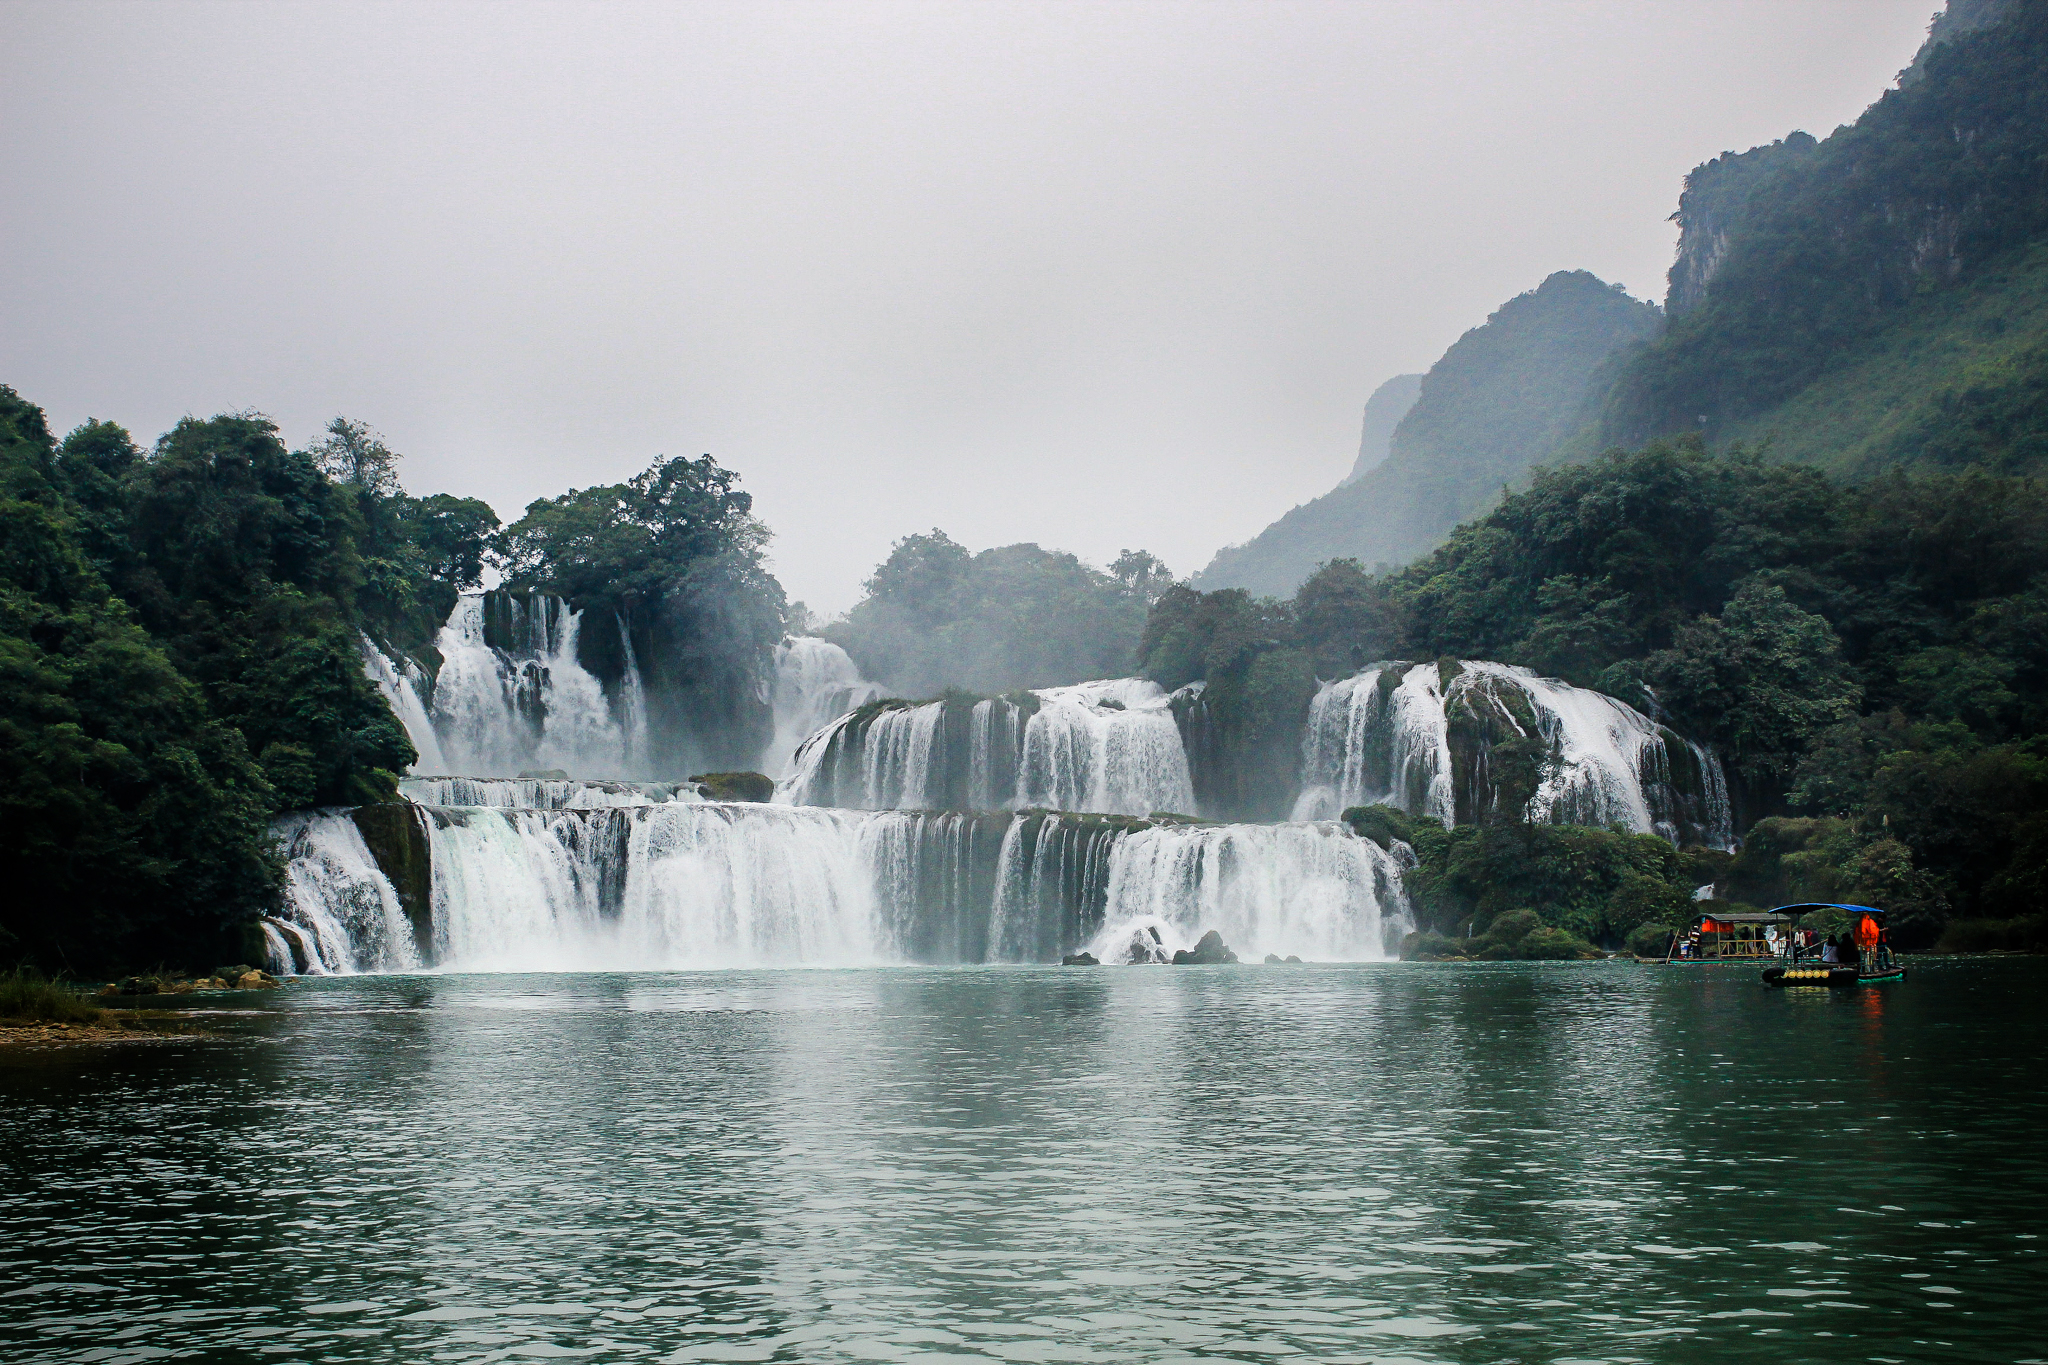 Stay lost in the mist, NANNING-GUILIN